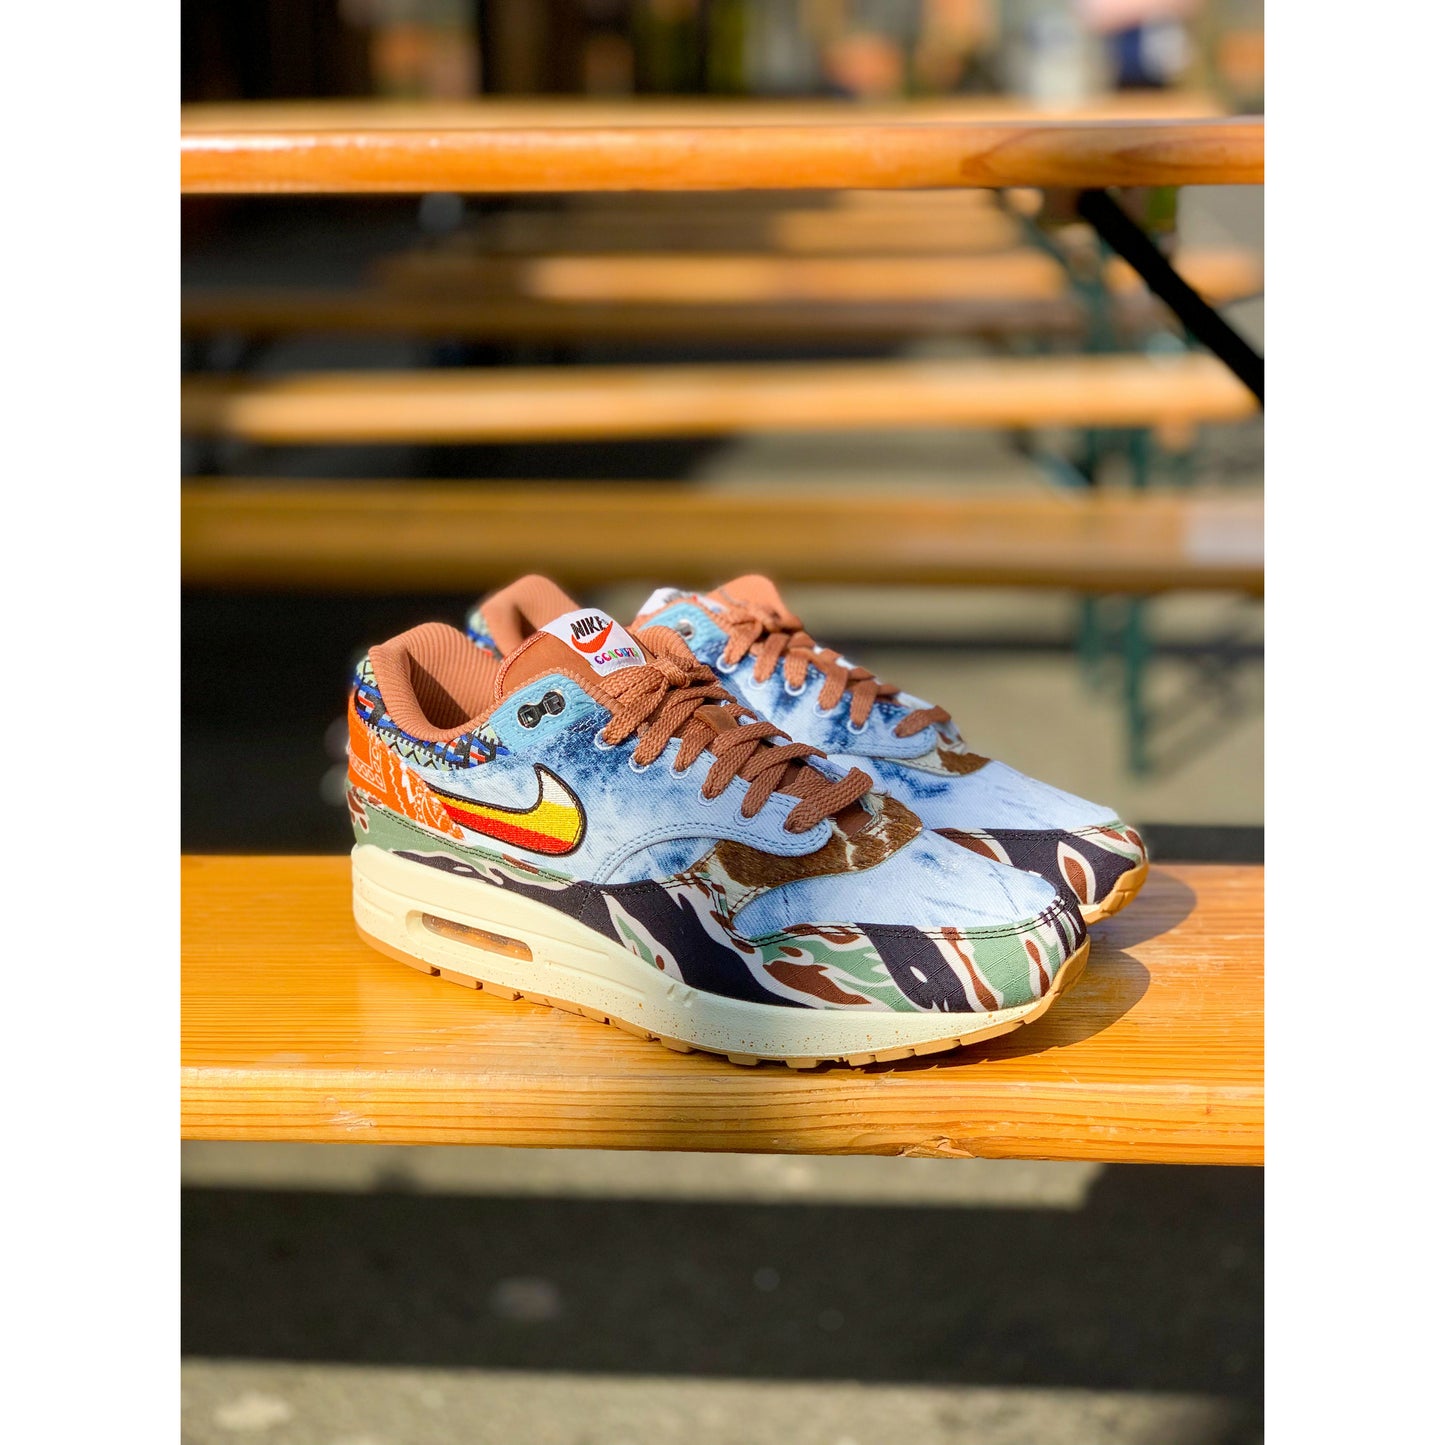 Nike Air Max 1 SP Concepts Heavy by Nike from £179.00